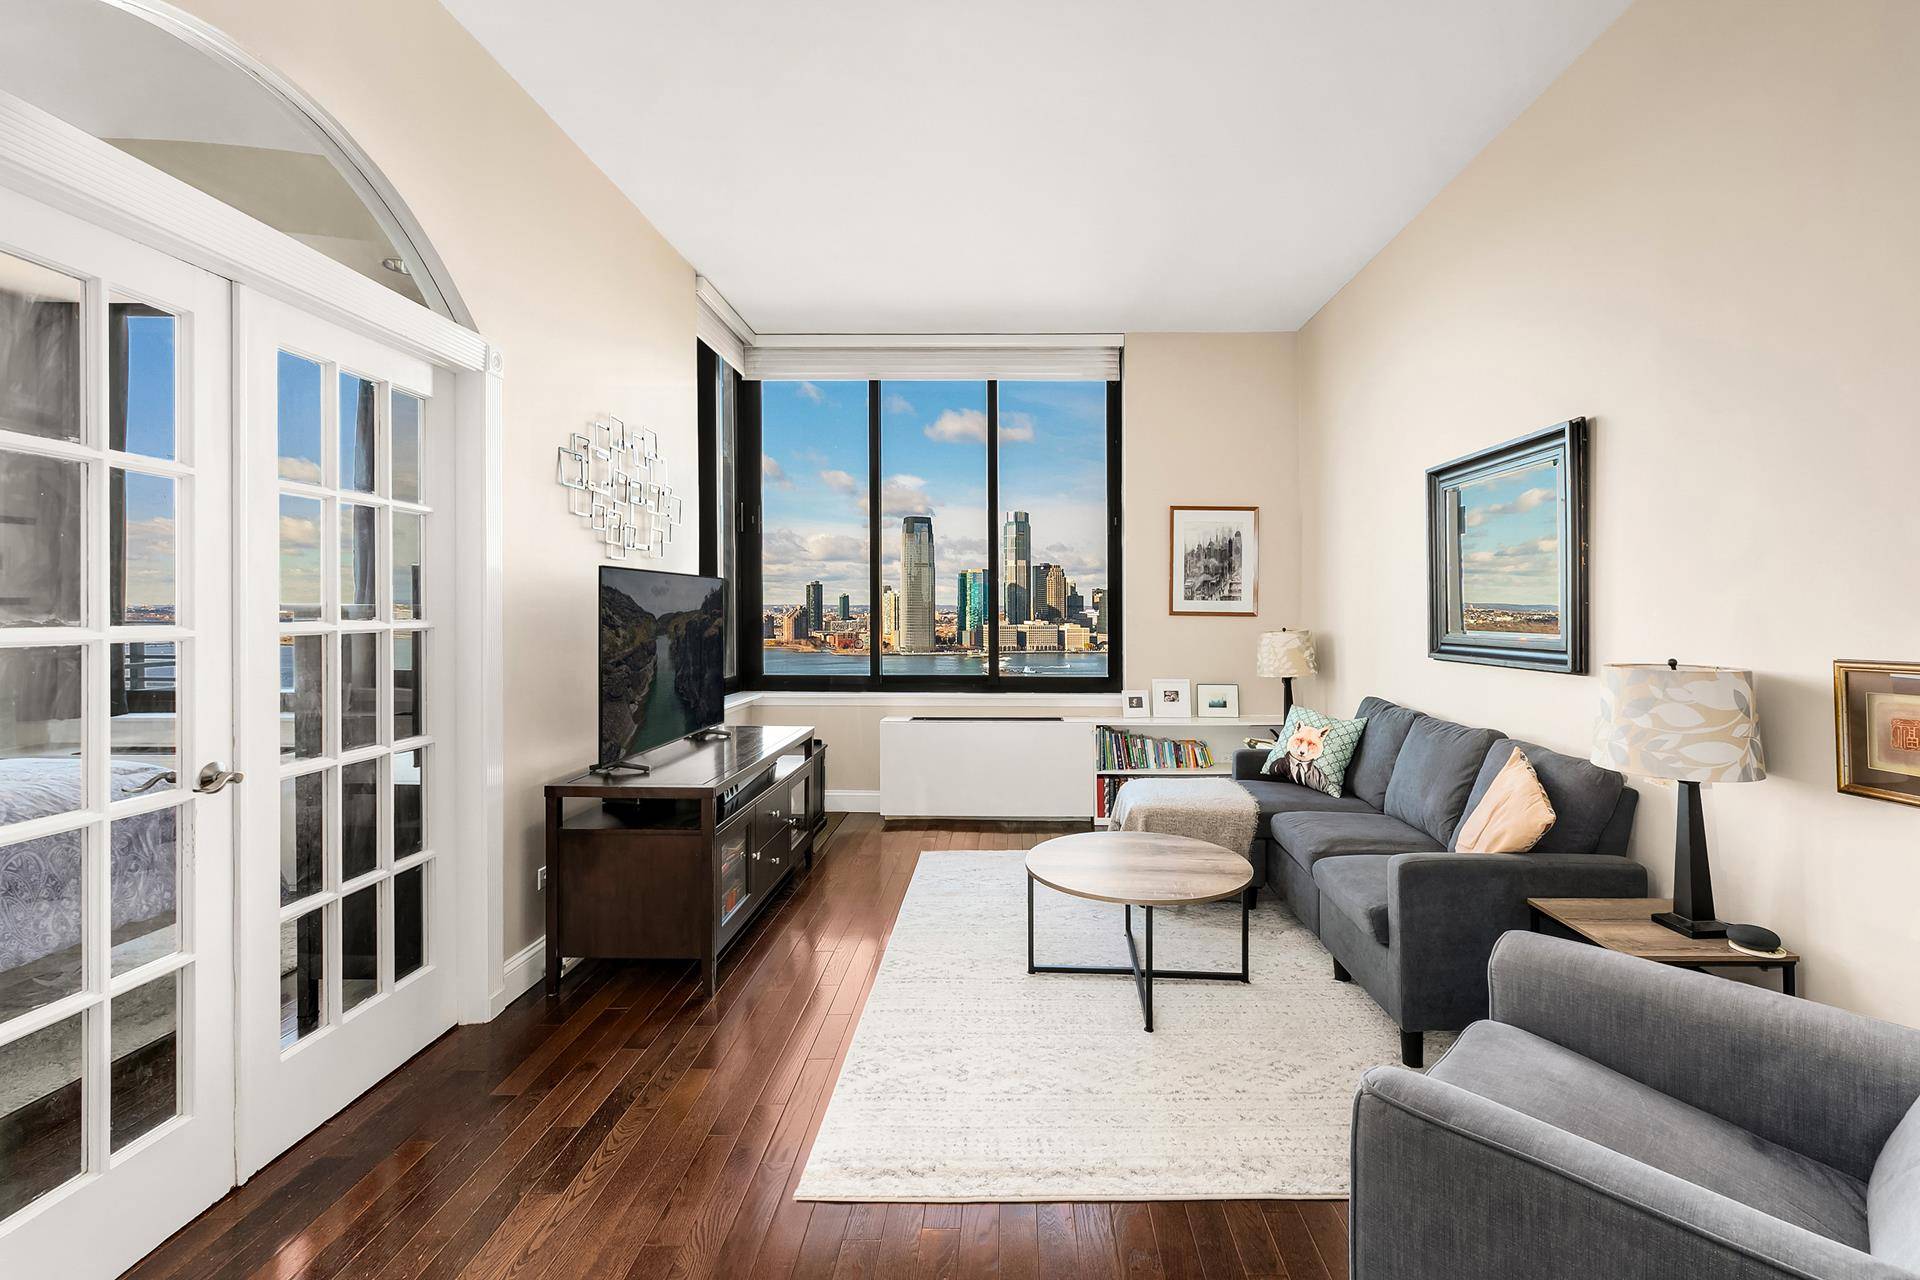 TENANT IN PLACE. Enjoy spectacular sunsets and inspirational Statue of Liberty and Ellis Island views from this high floor one bedroom condominium overlooking New York Harbor.